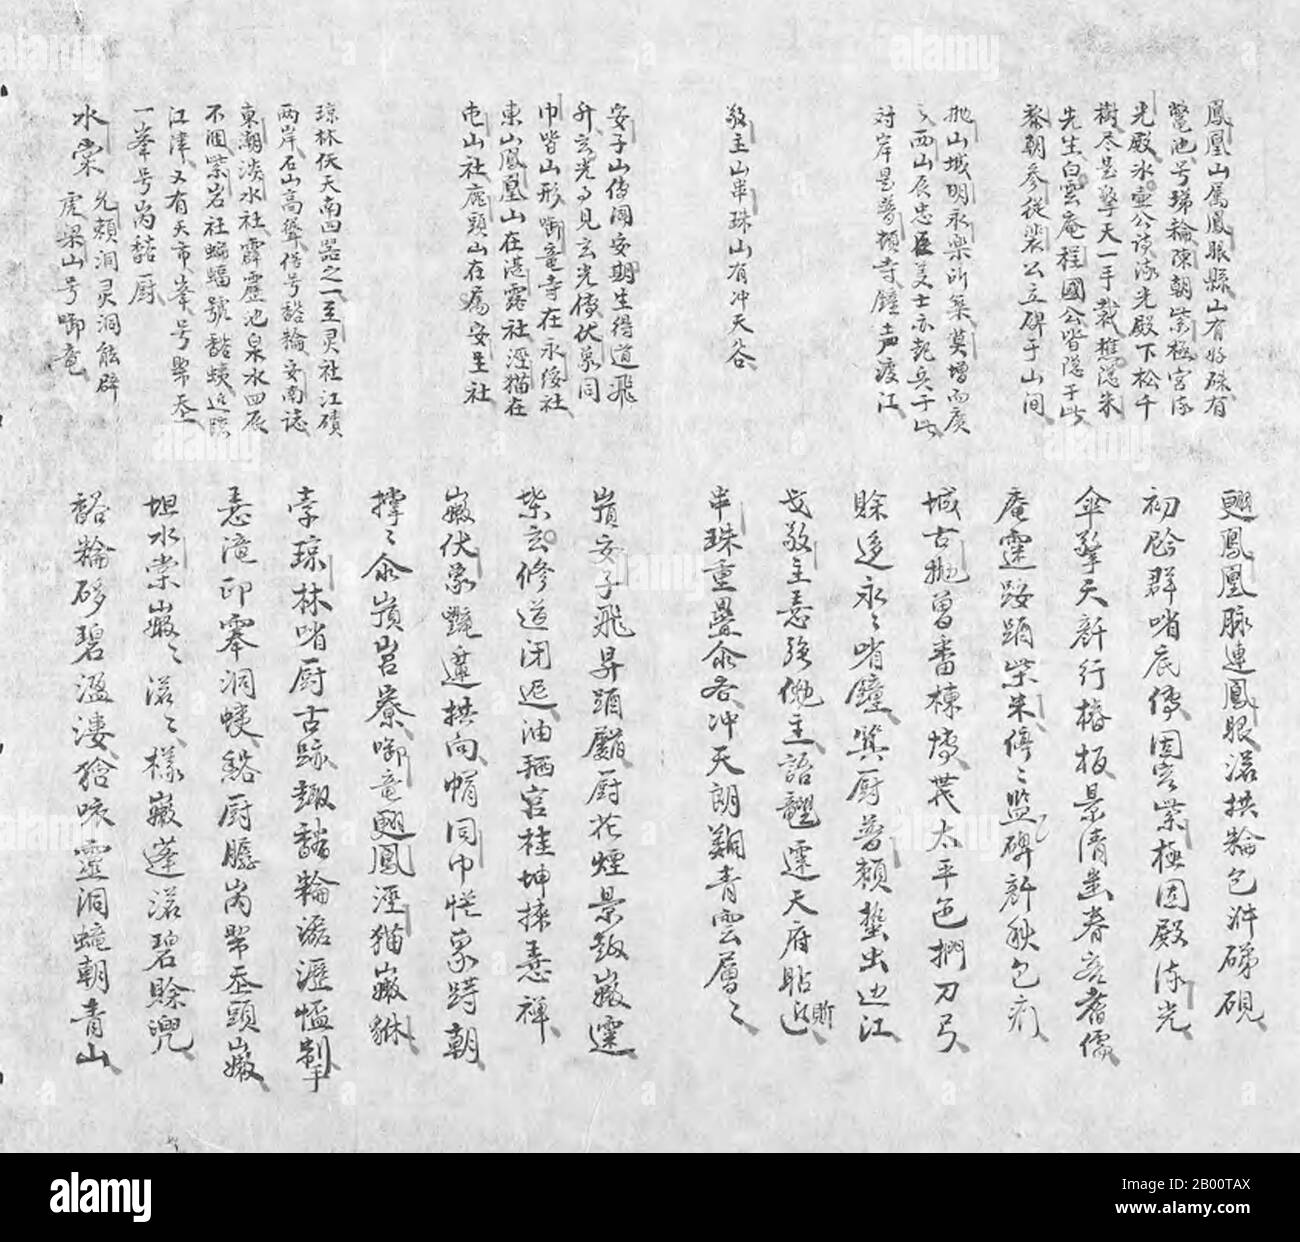 Vietnam: Two pages from a text handwritten in Han-Nom. Probably late 19th or early 20th century.  Chu Nom is an obsolete writing system of the Vietnamese language. It makes use of Chinese characters (known as Han Tu in Vietnamese), and characters coined following the Chinese model. The earliest known example of Chu Nom dates to the 13th century. It was used almost exclusively by the Vietnamese elite, mostly for recording Vietnamese literature (formal writings were, in most cases, not done in Vietnamese, but in classical Chinese). It has almost been completely replaced by Quoc Ngu. Stock Photo